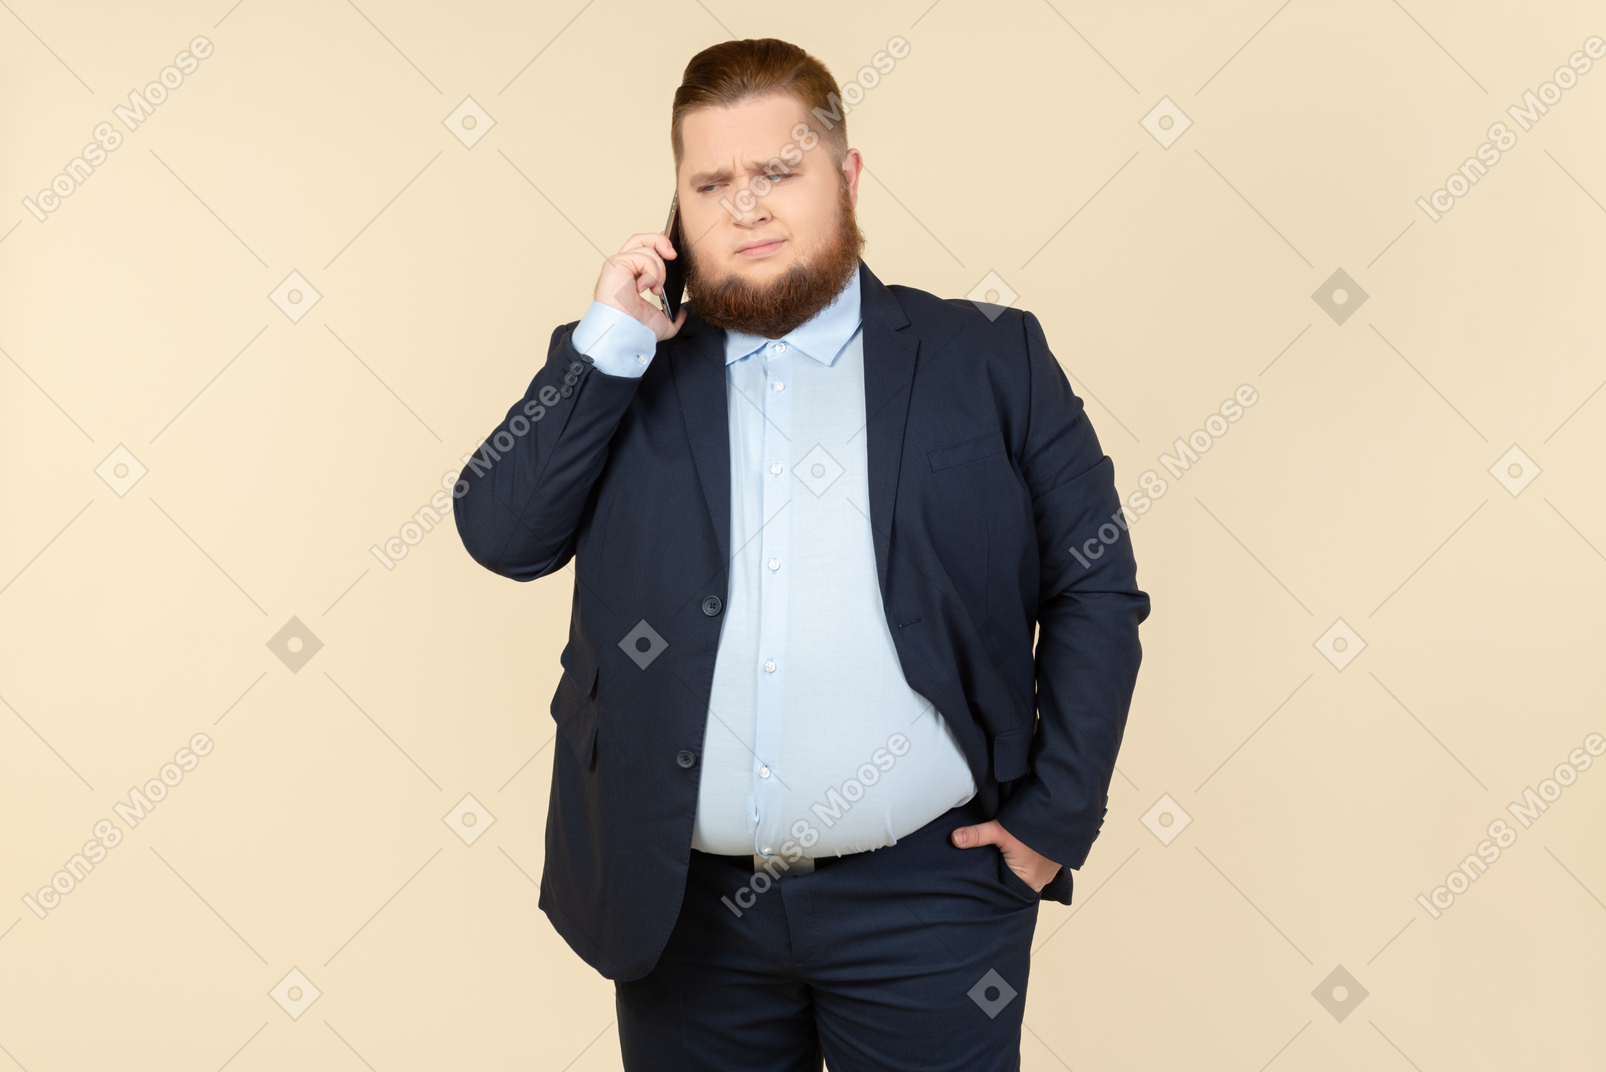 Sad looking young overweight office worker talking on the phone